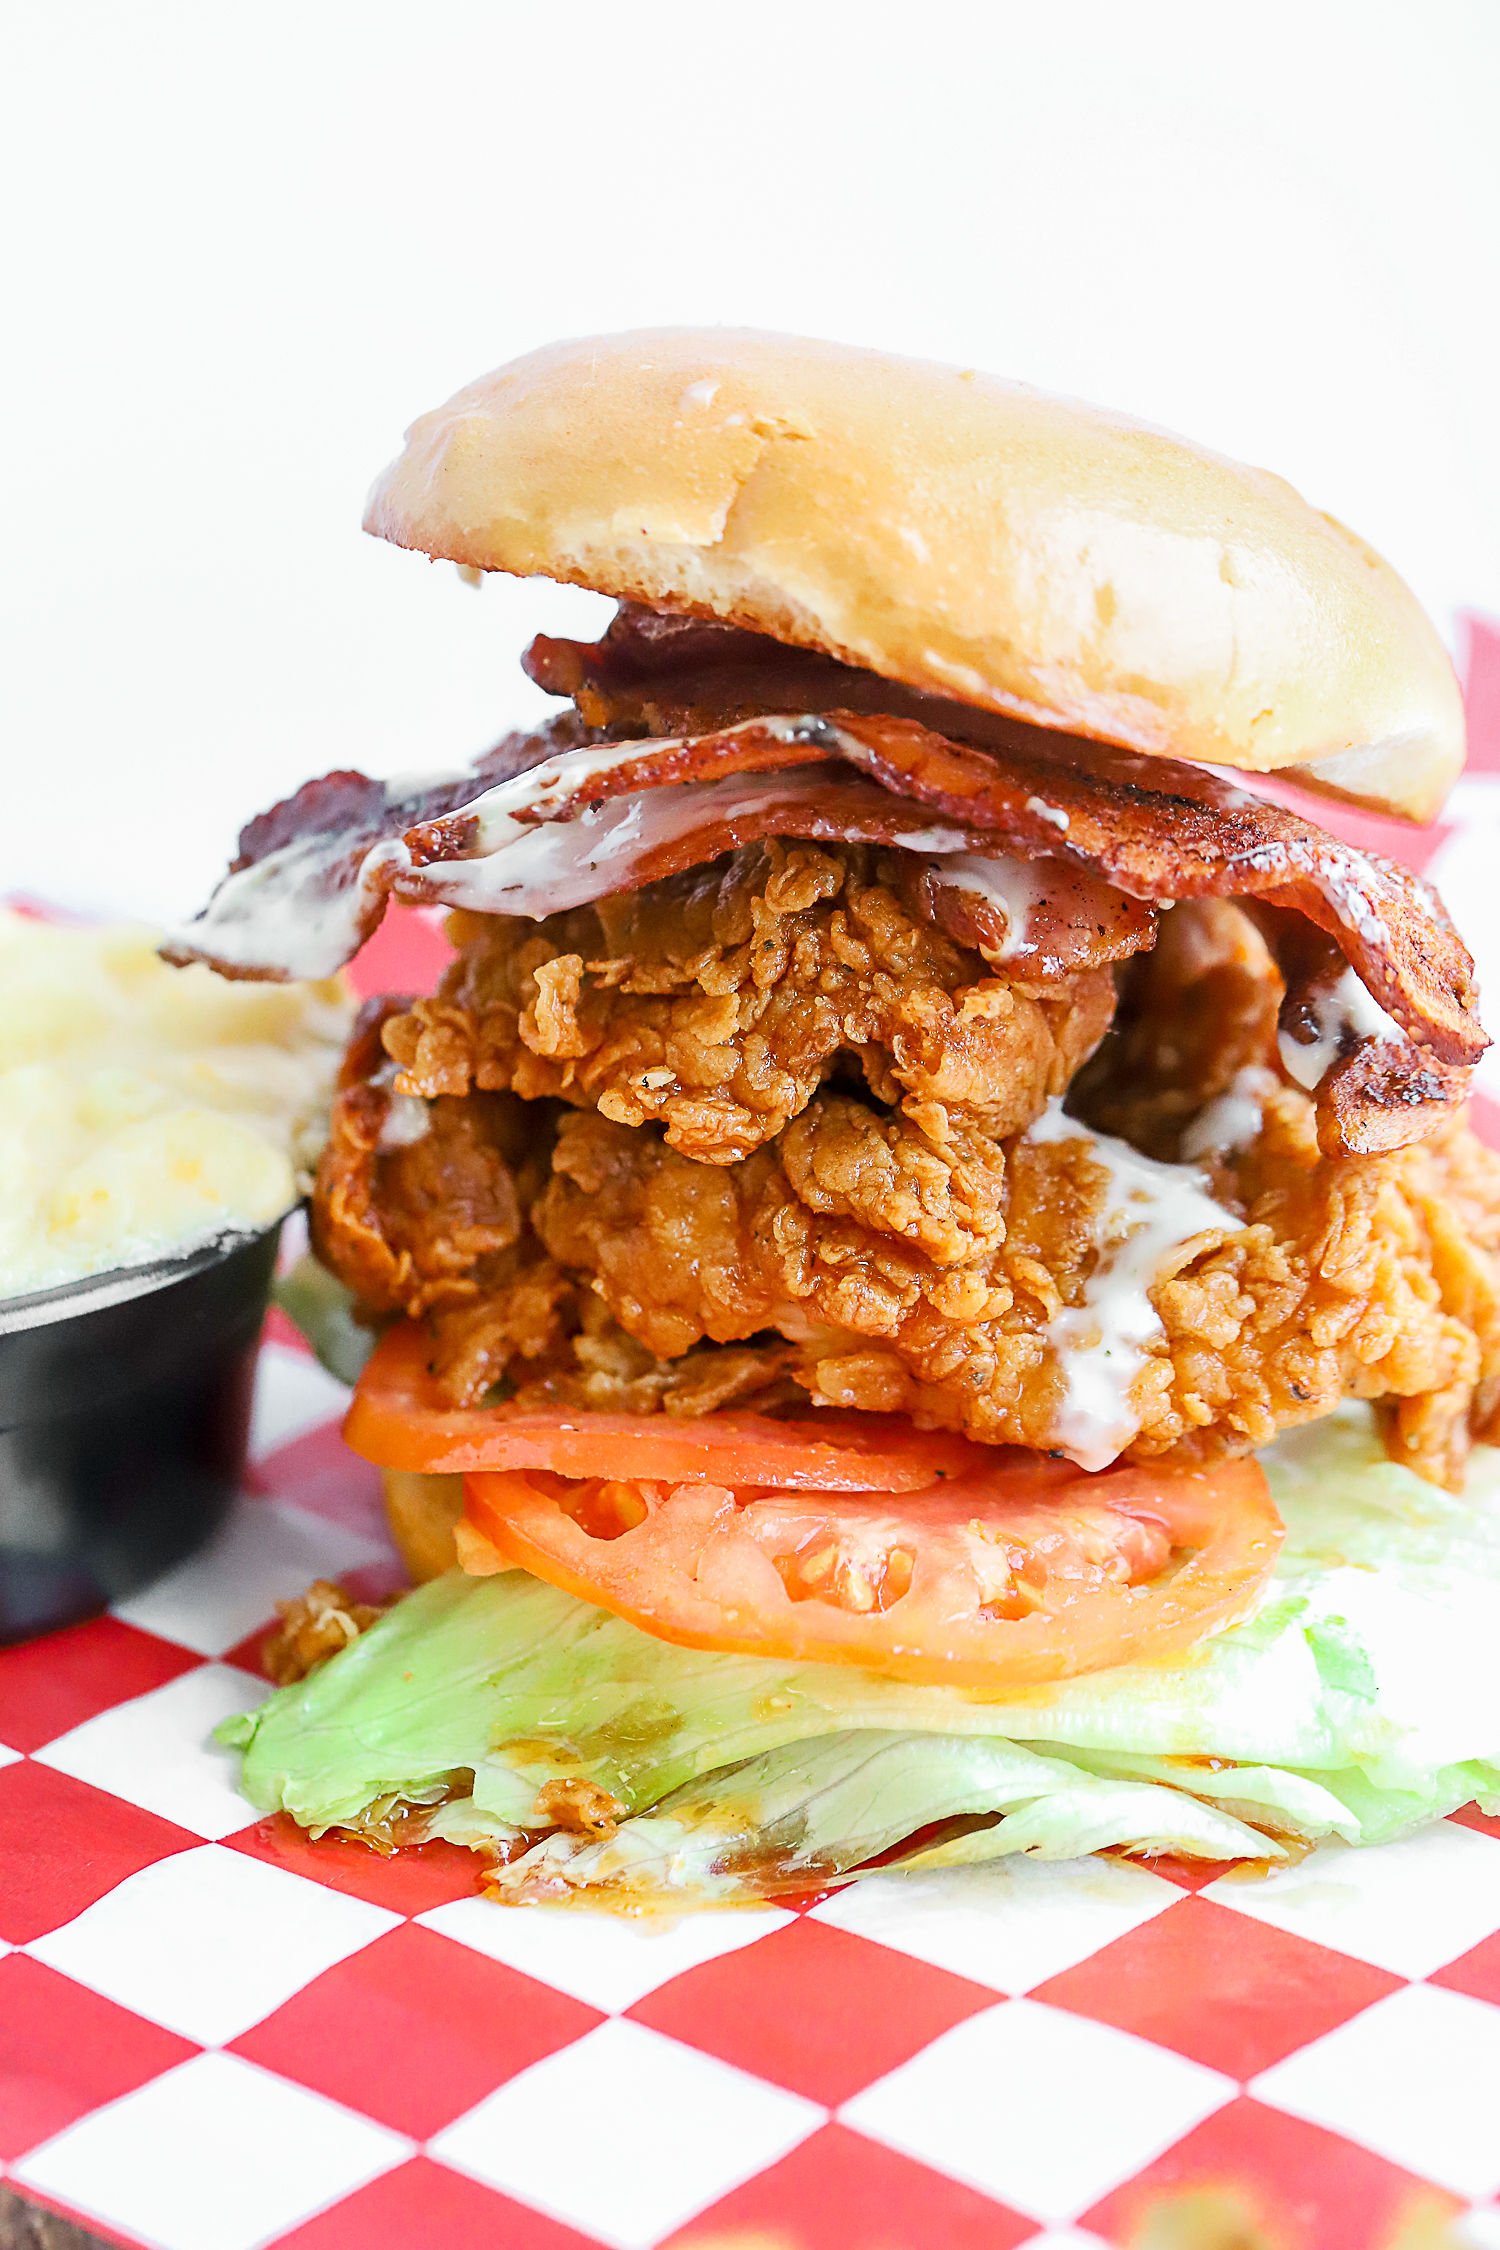 The fried chicken club sandwich. Photo courtesy of Roaming Rooster.